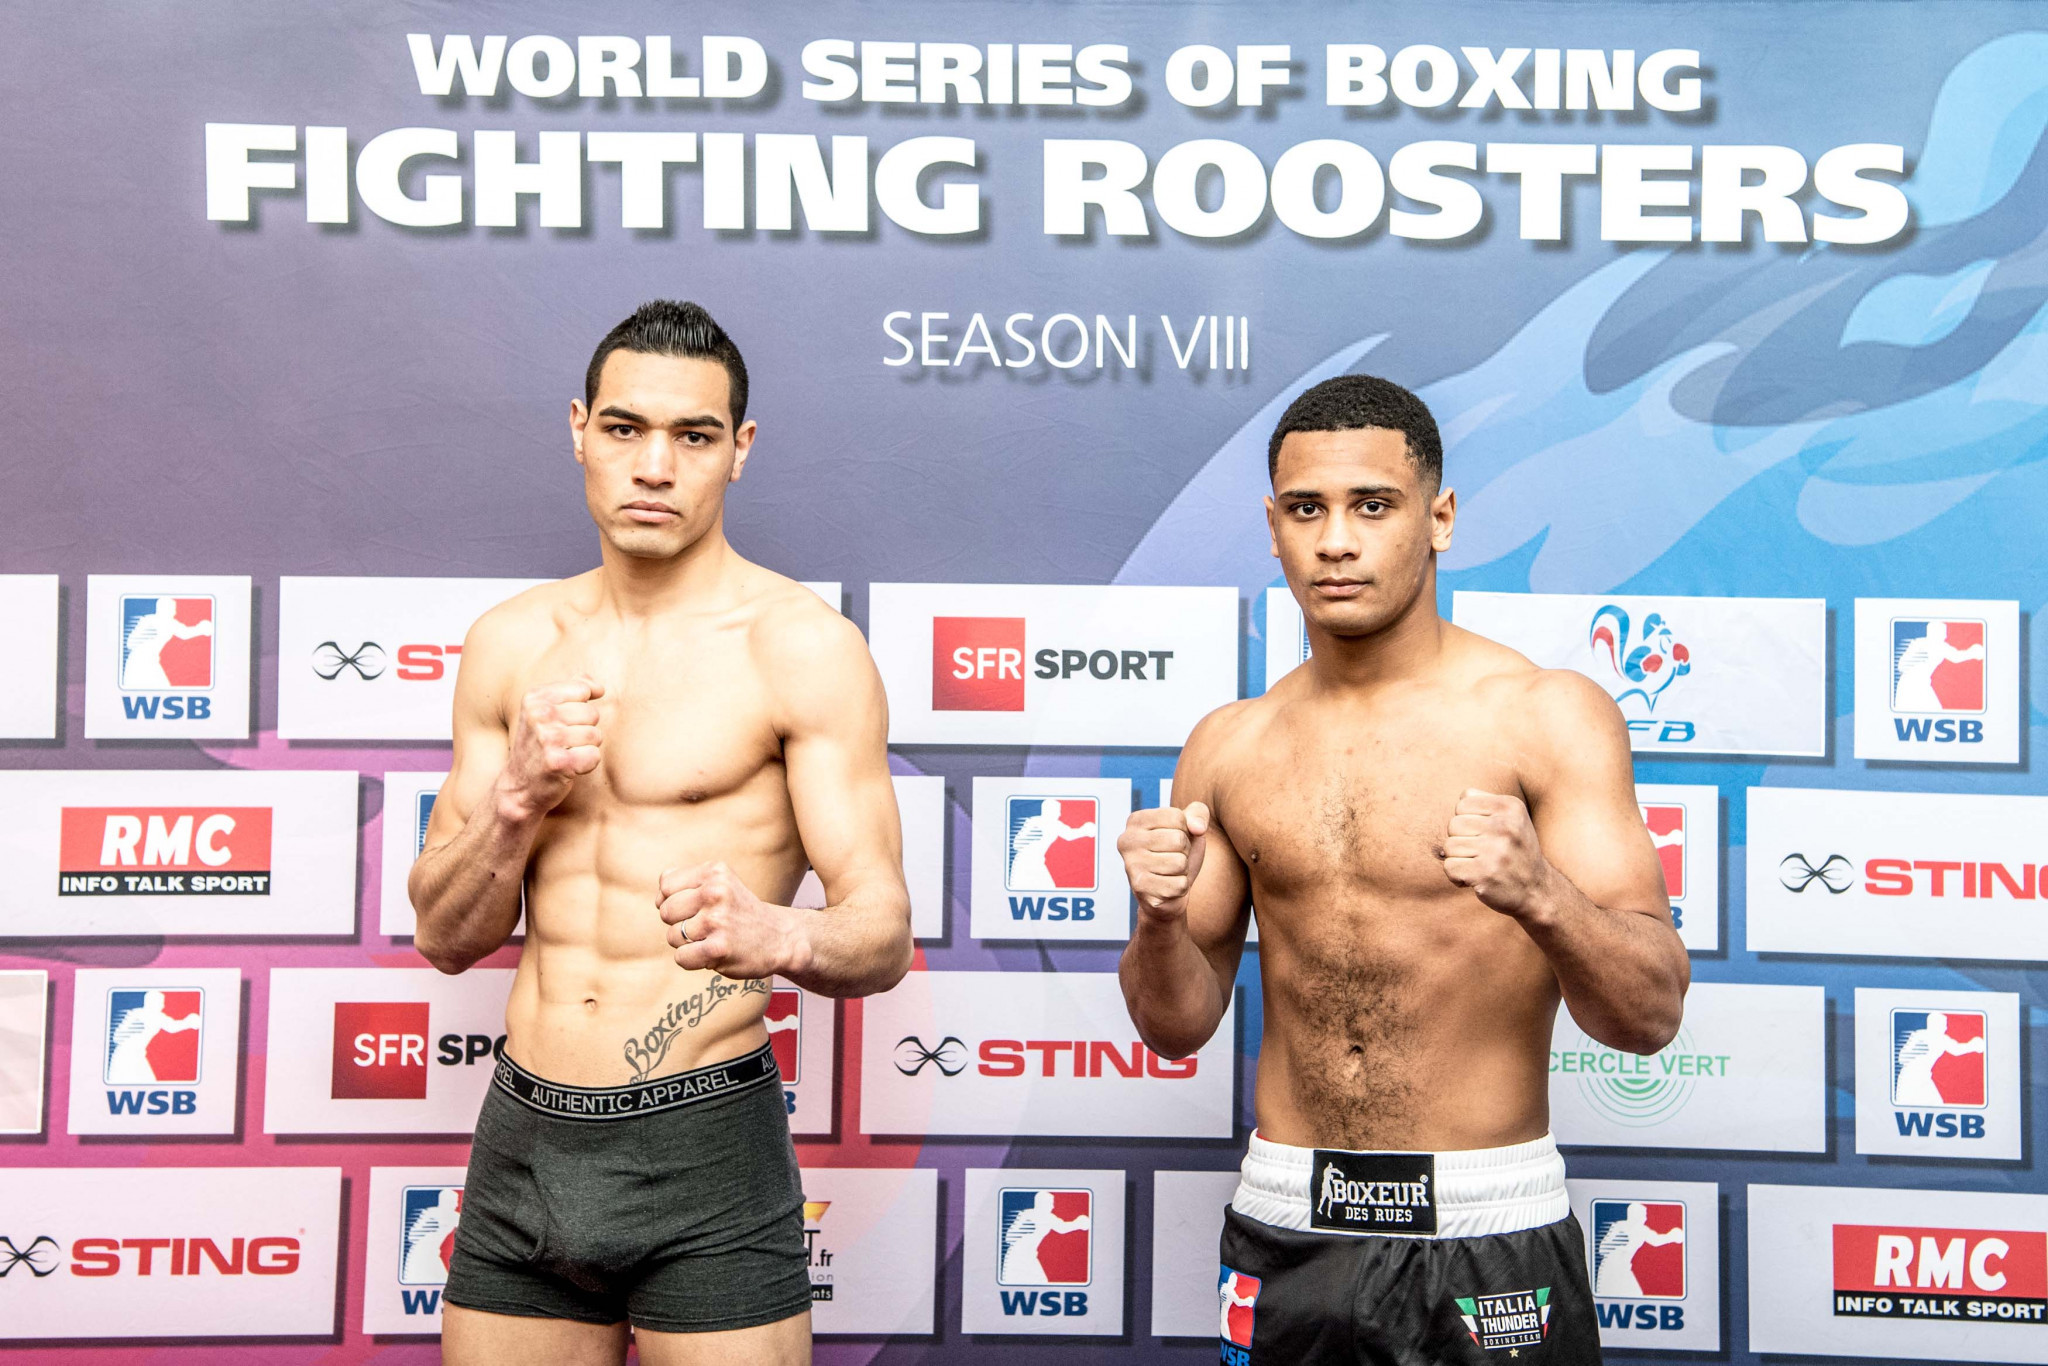 France Fighting Roosters look to consolidate place at top of World Series of Boxing group